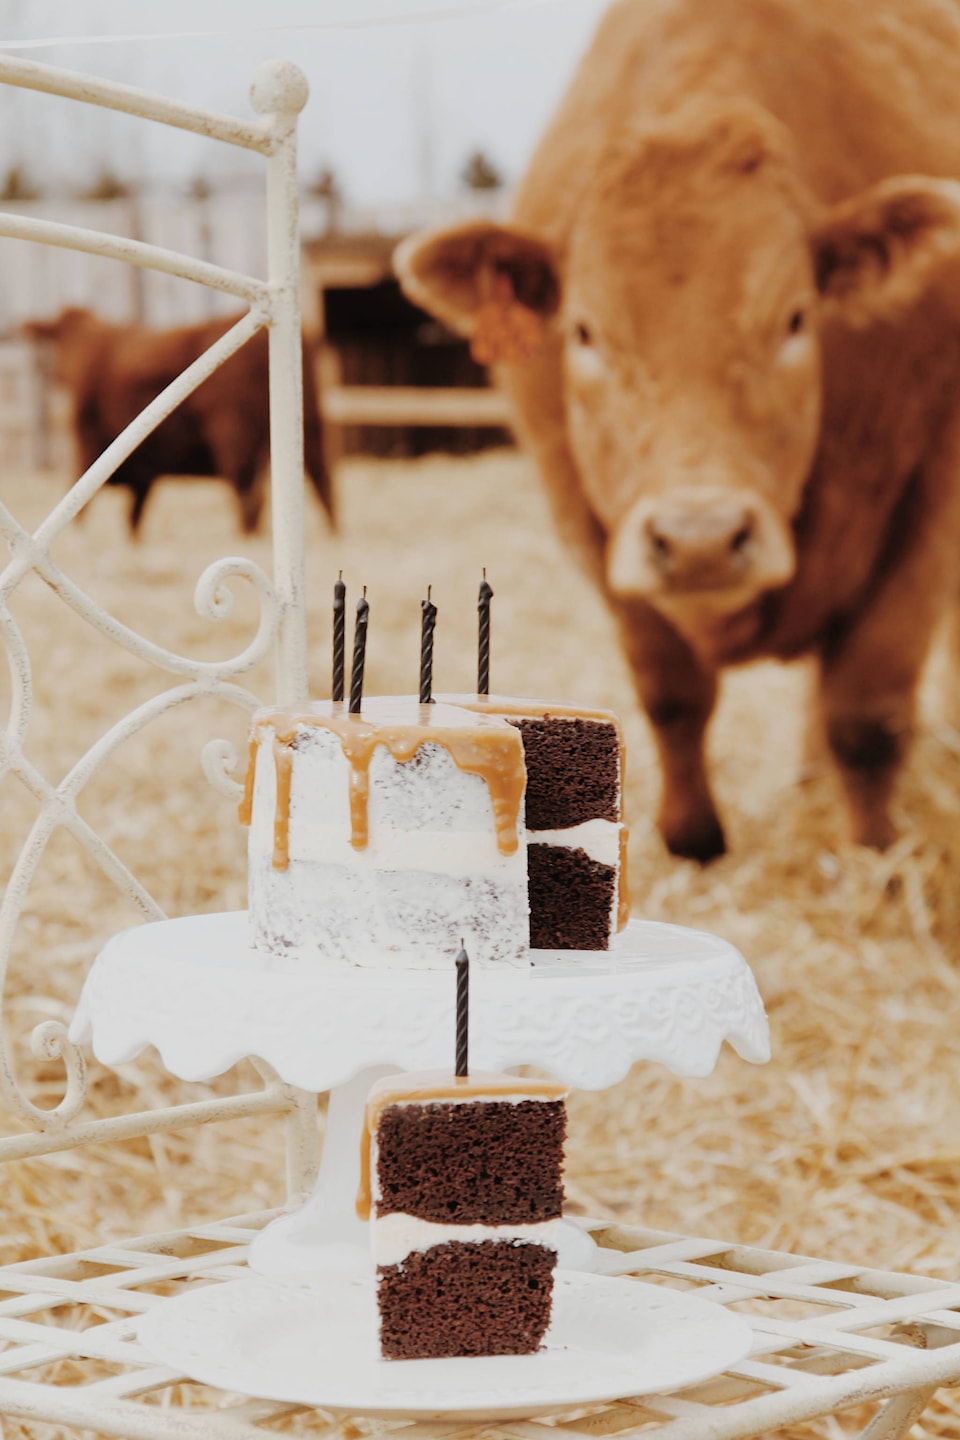 14628203_web1_cow-and-cake2018-04-14-04.01.13-1